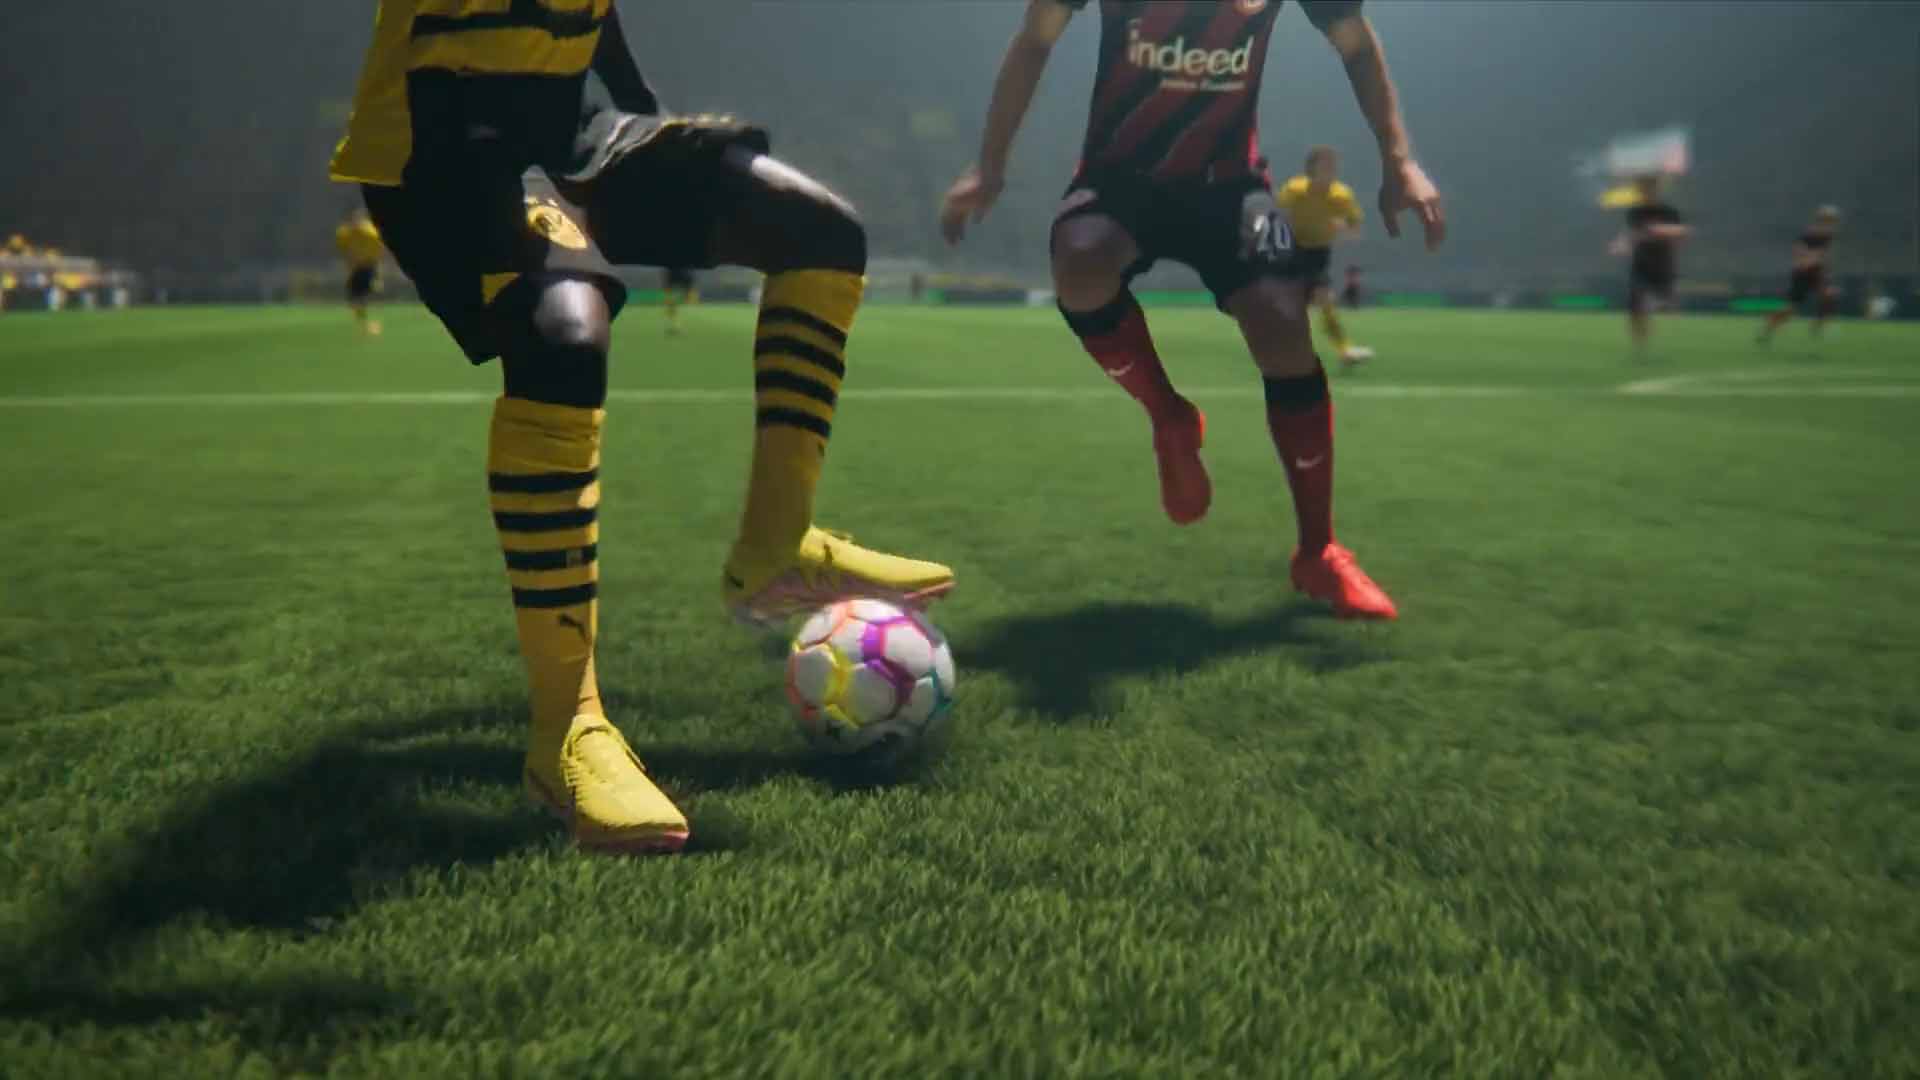 EA FC 24 crossplay & cross-progression explained, from Clubs to